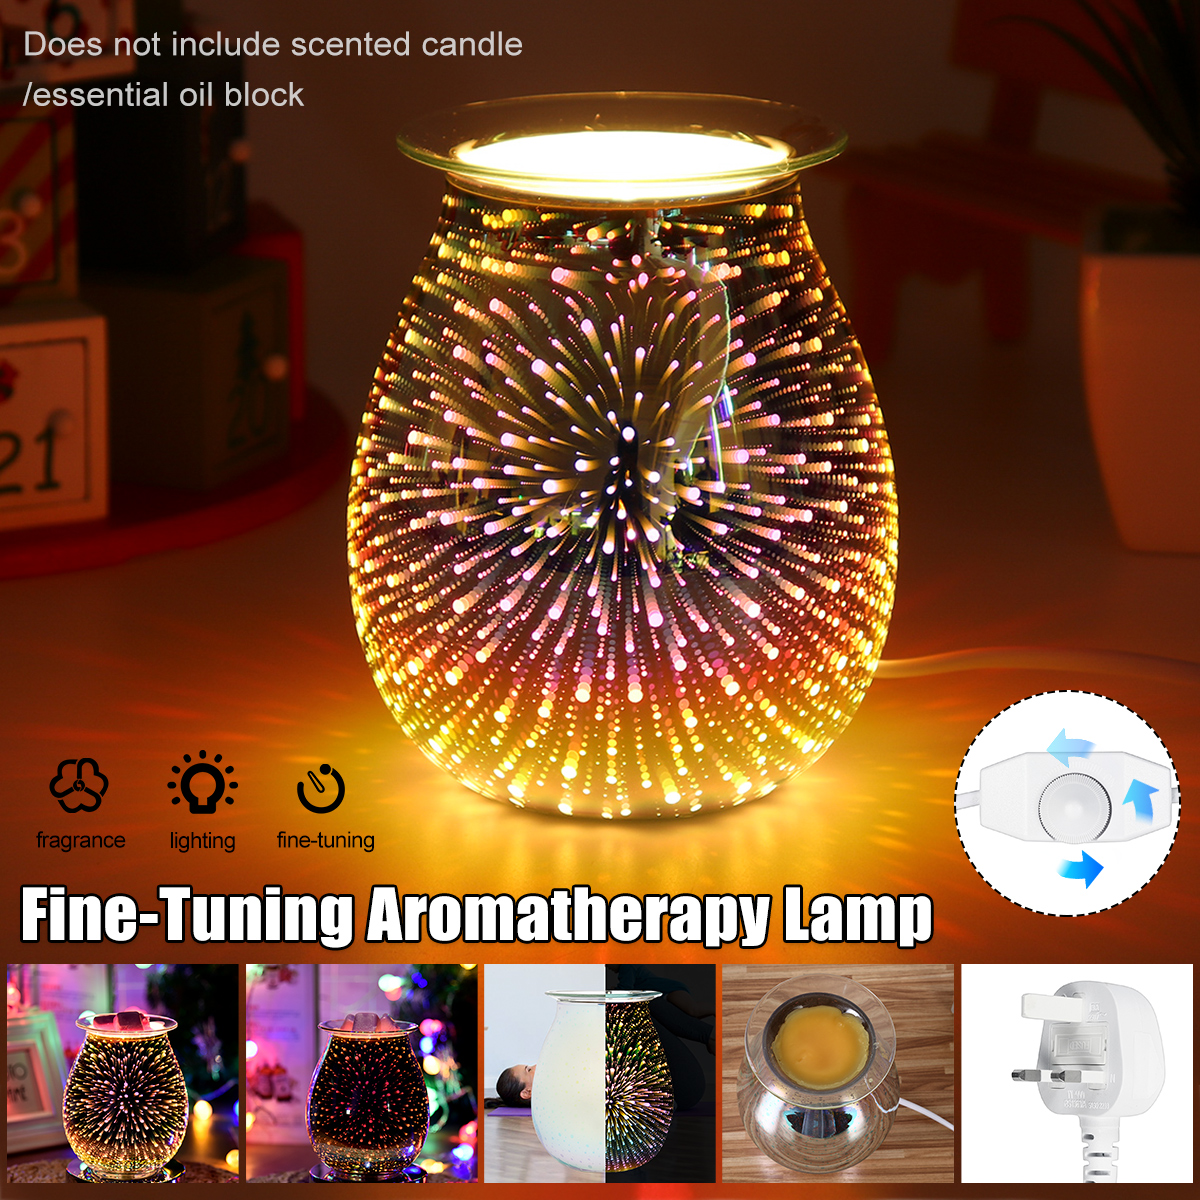 3D-Glass-Electric-Aromatherapy-Lamp-Fine-tuning-Home-Aromatherapy-Machine-1791721-1